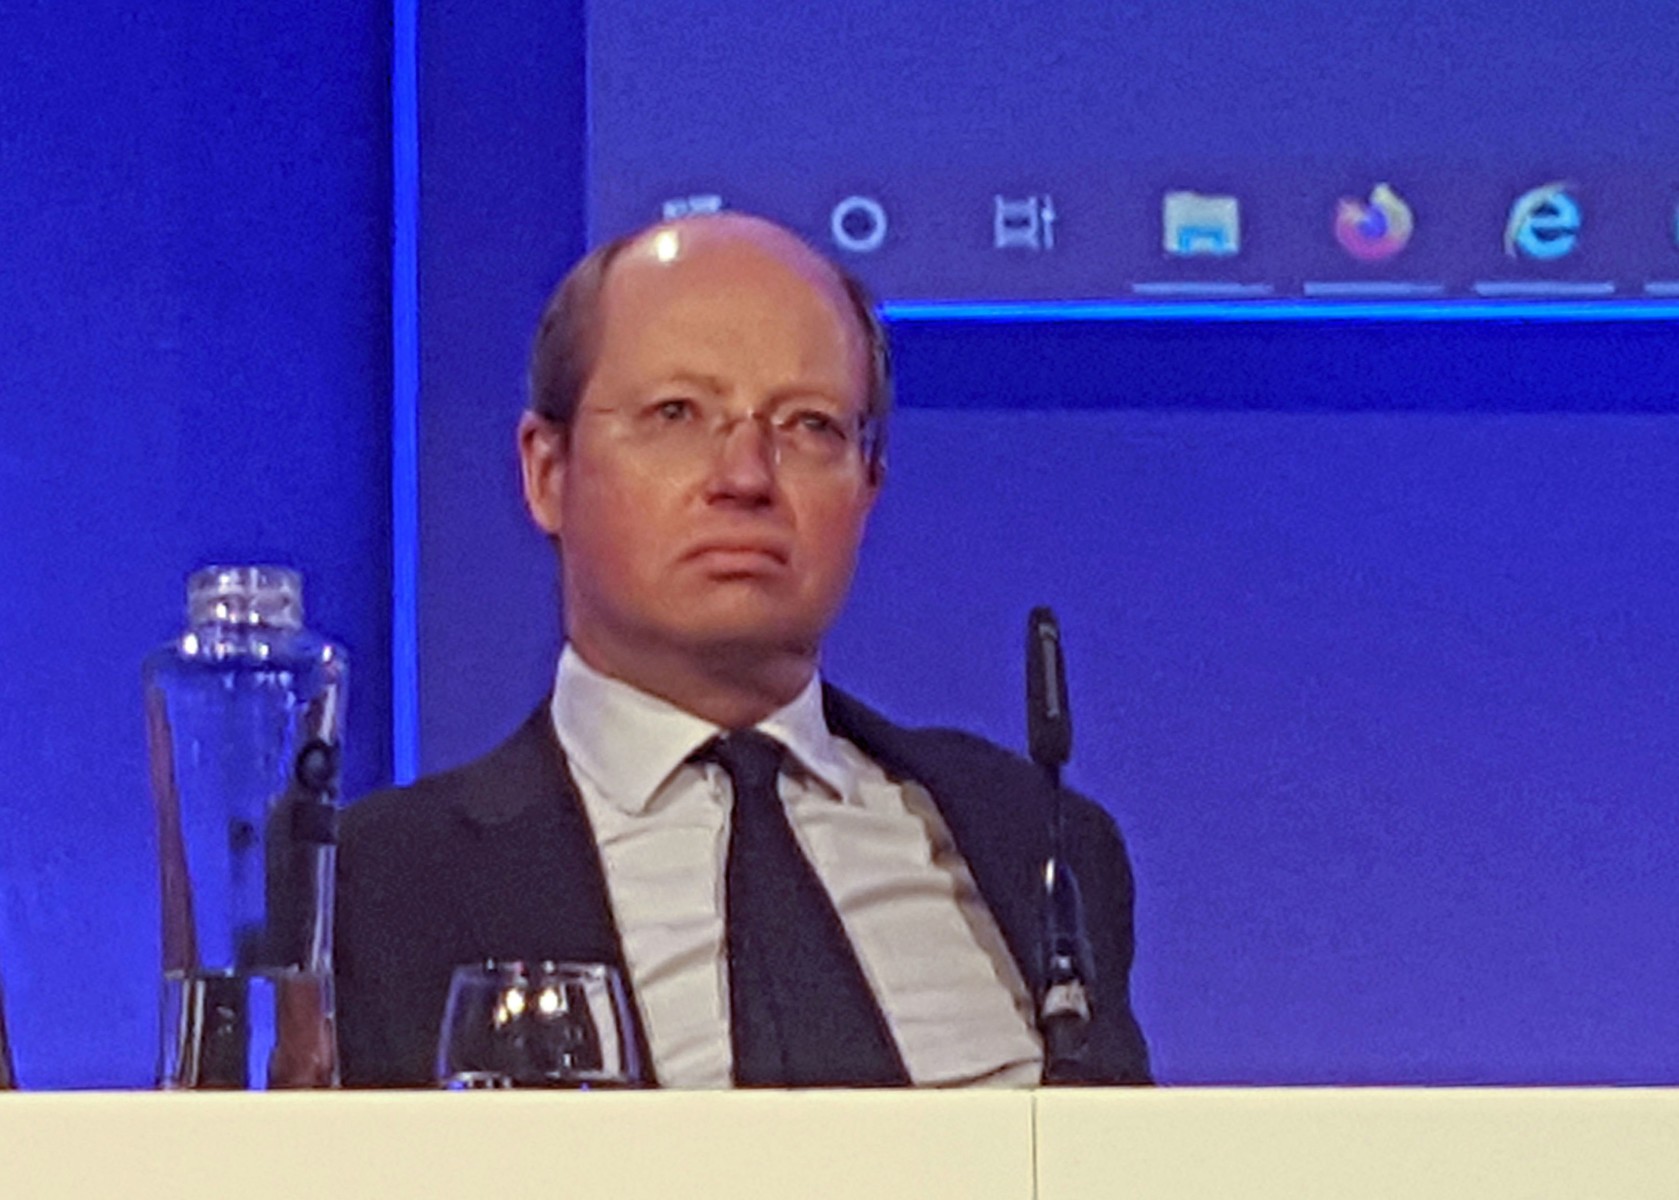 Sir Philip Rutnam quit today after clashes with the Home Secretary